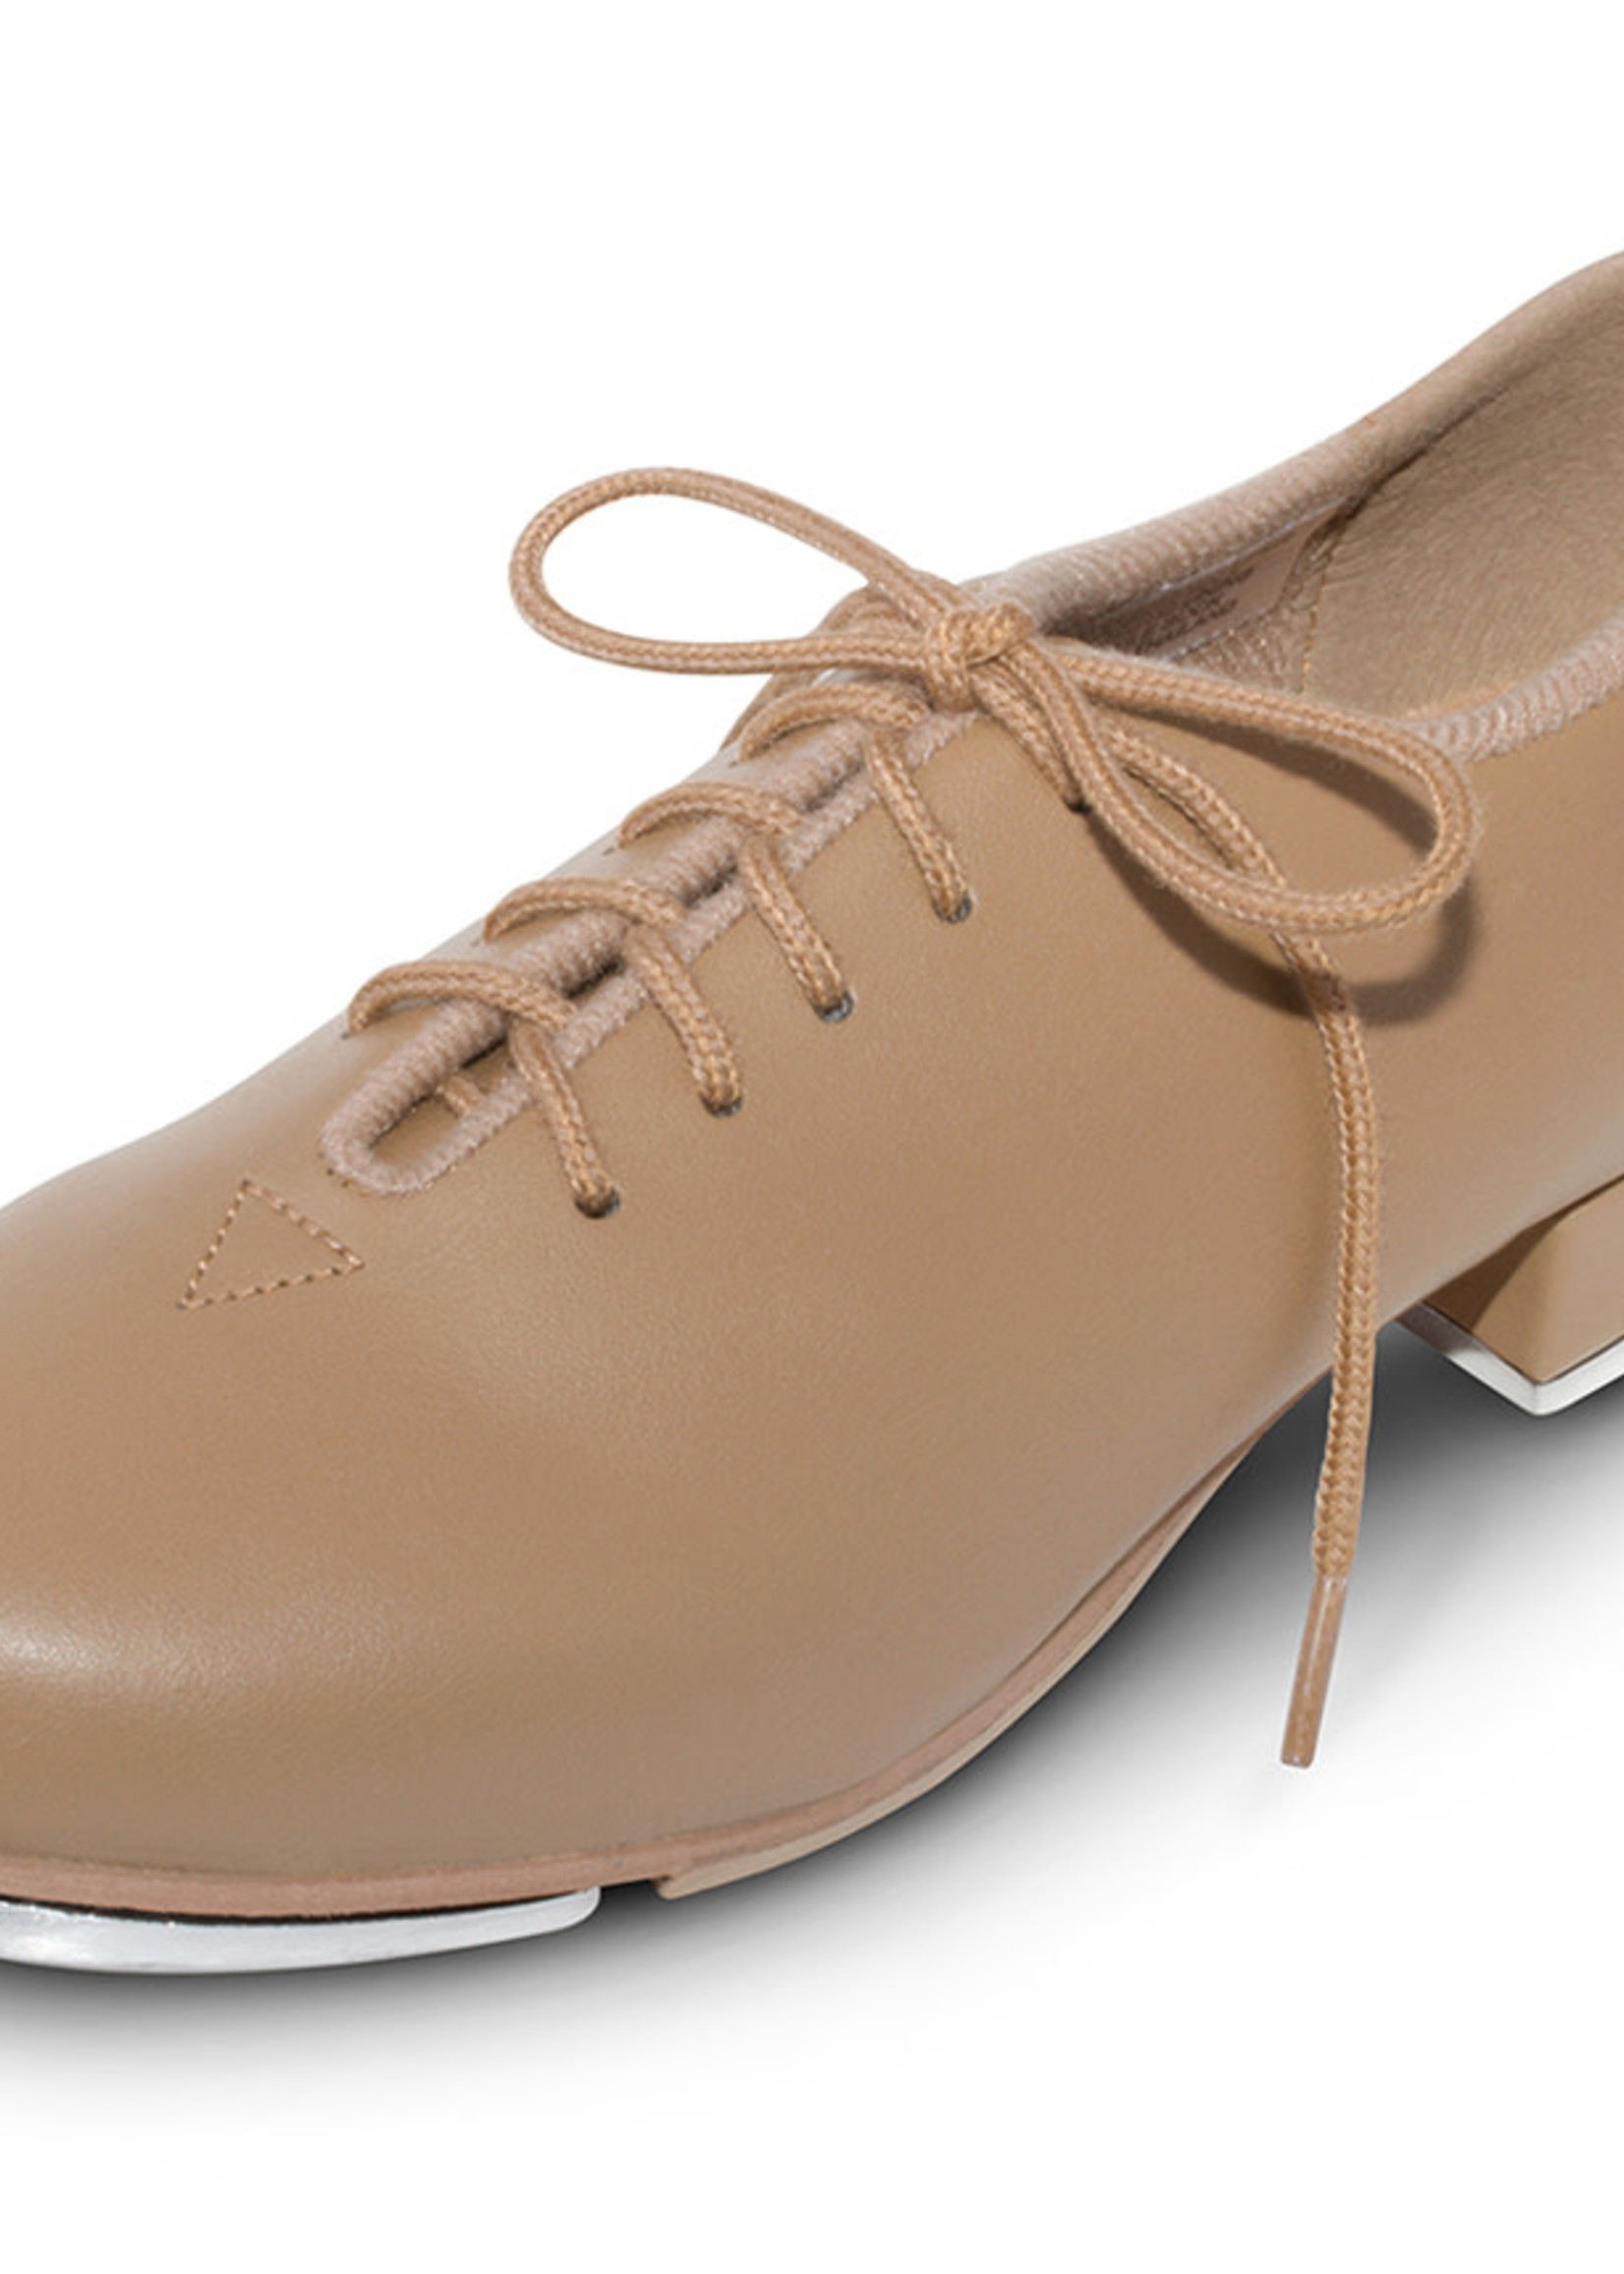 Leo's Adult Oxford Jazz Lace Up Tap Shoe